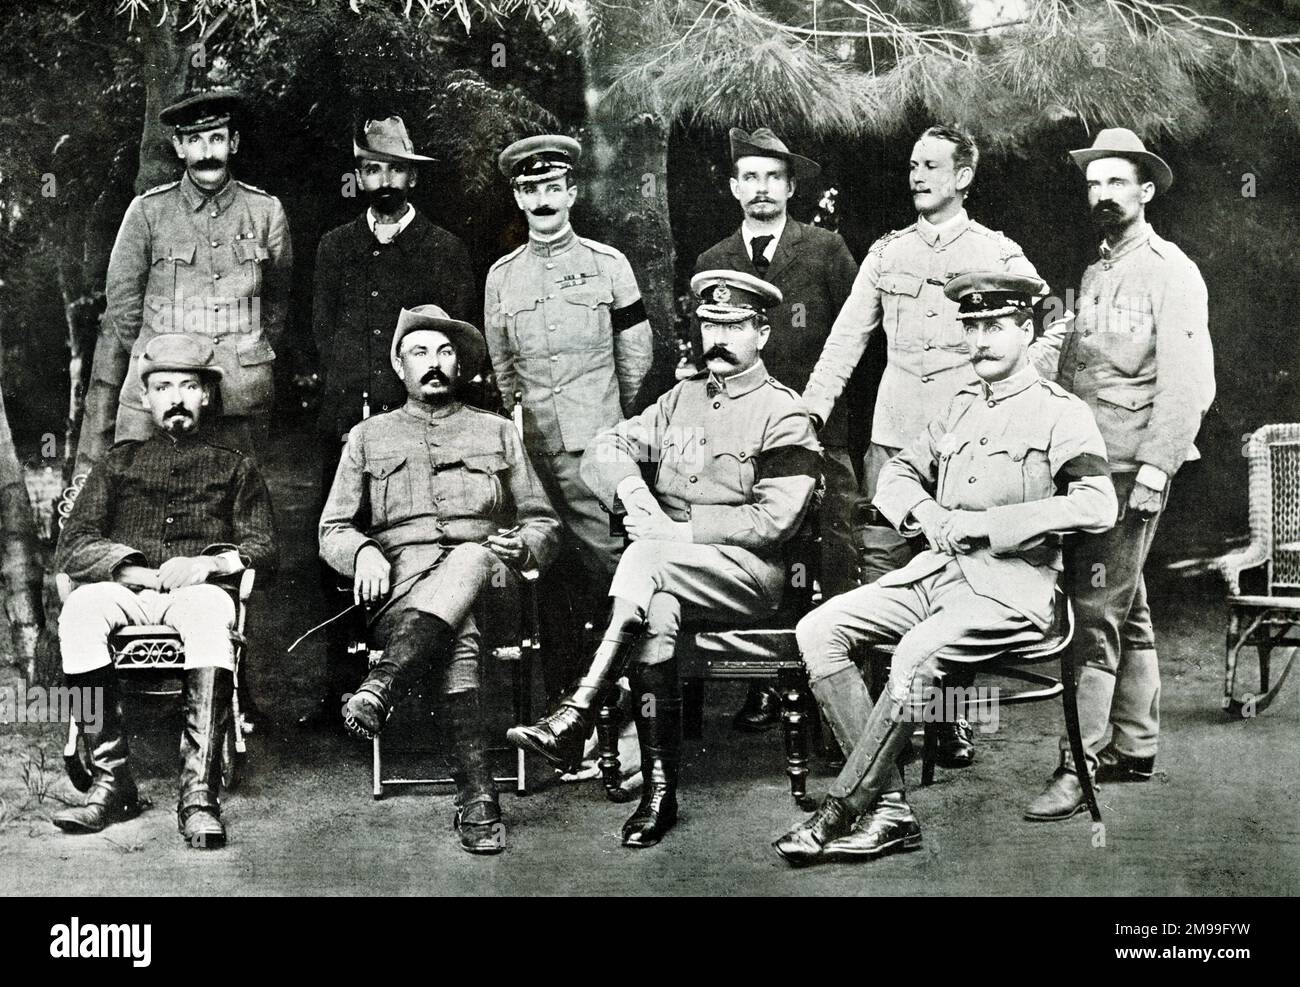 Boer War, group photo, first attempt (unsuccessful) to arrive at peace, at Middelburg in March 1901.  Back row (left to right): Colonel Henderson, Van Velden, Major Watson, H Fraser, Colonel Hamilton, H de Jager. Front row: General De Wet, General Louis Botha, Viscount Kitchener, Major Maxwell. Stock Photo